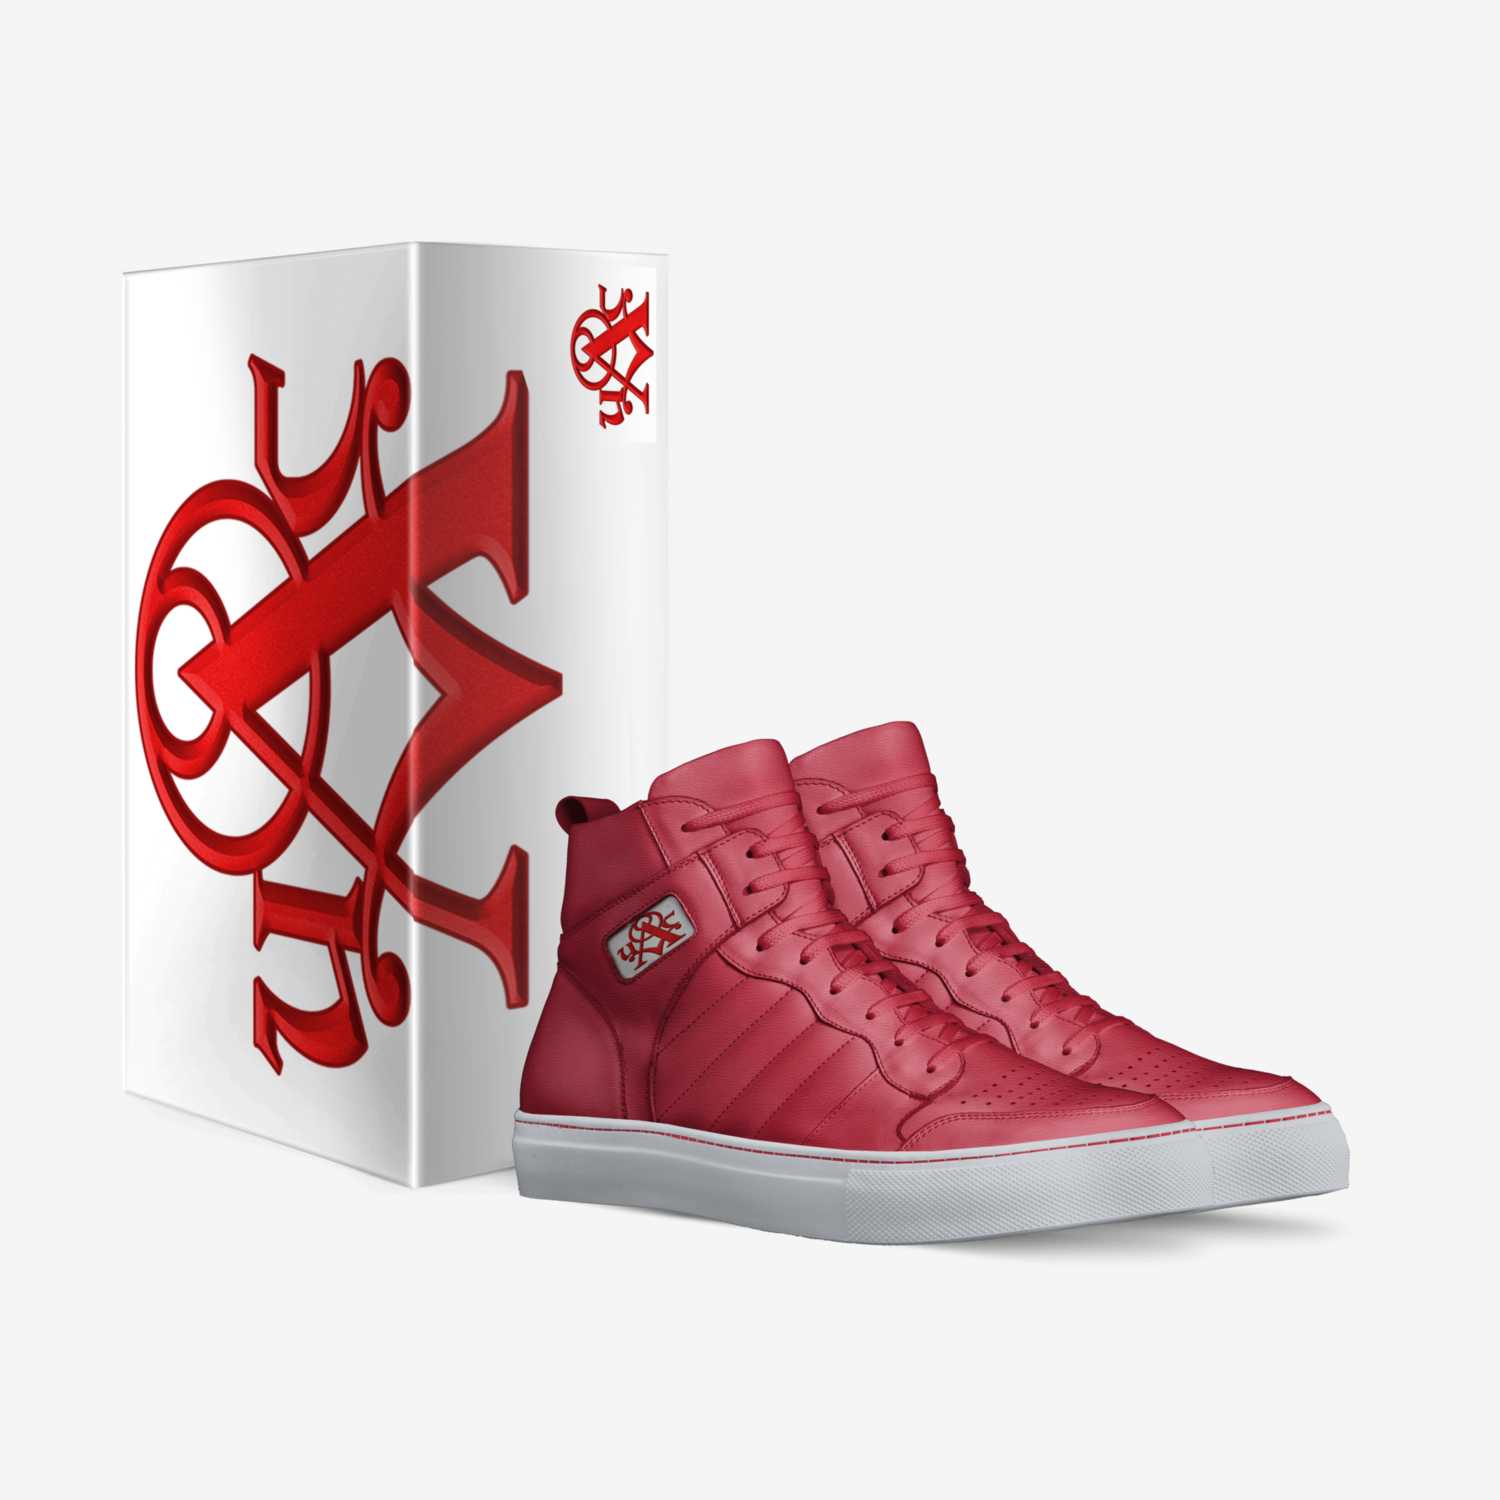 Red Hightops custom made in Italy shoes by Urban Alchemist Clothing | Box view